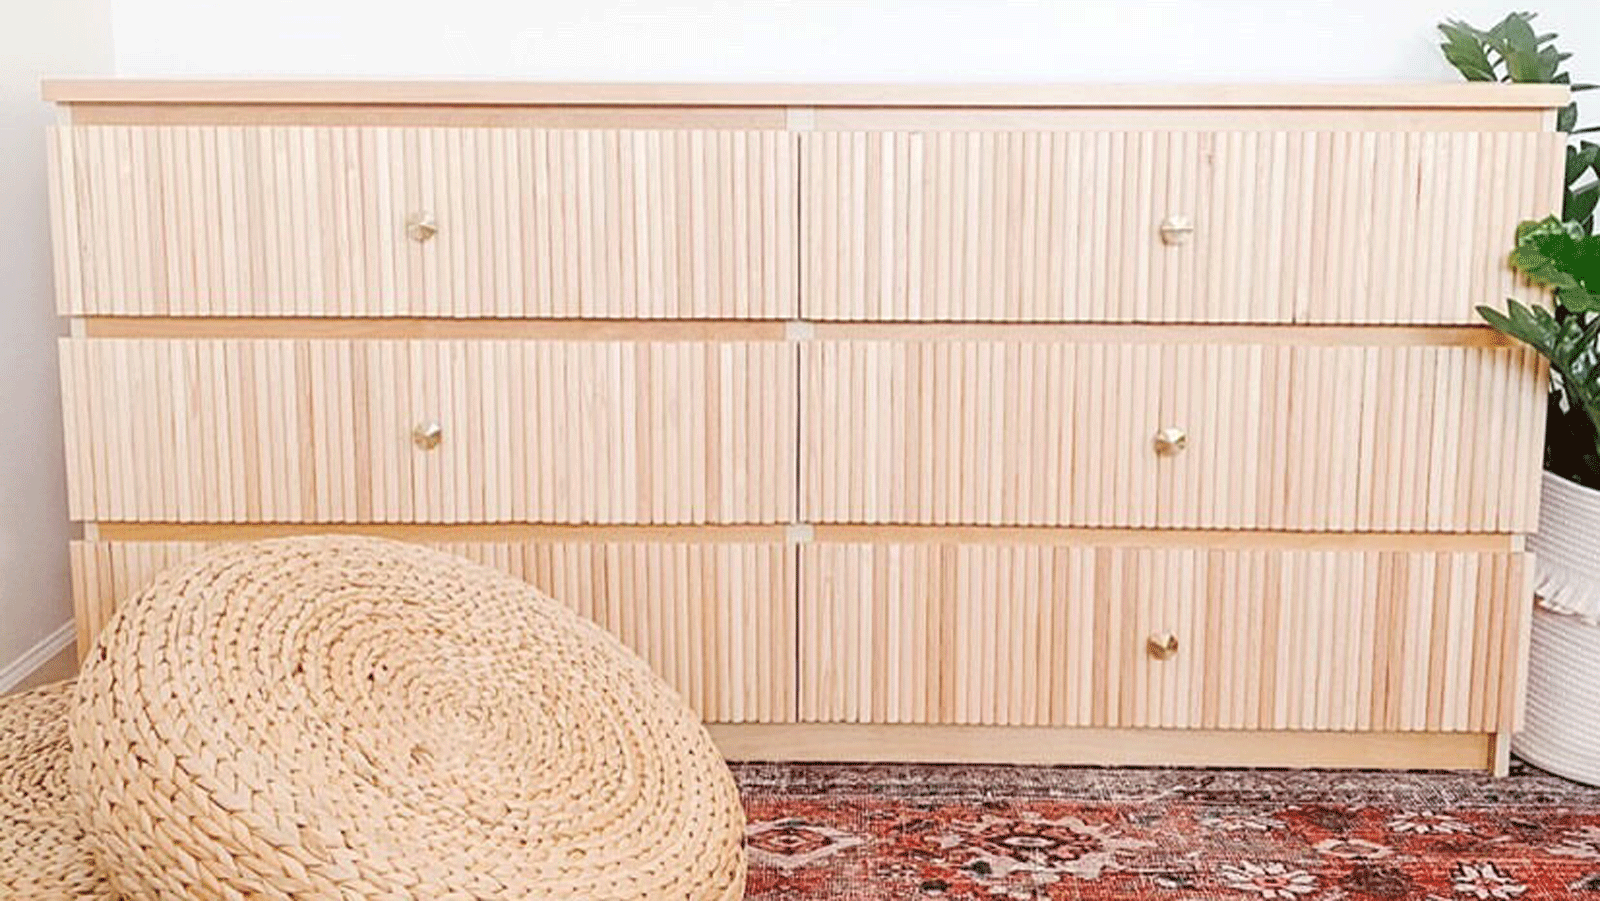 Get the on-trend fluted look for cheap with this genius IKEA dresser hack